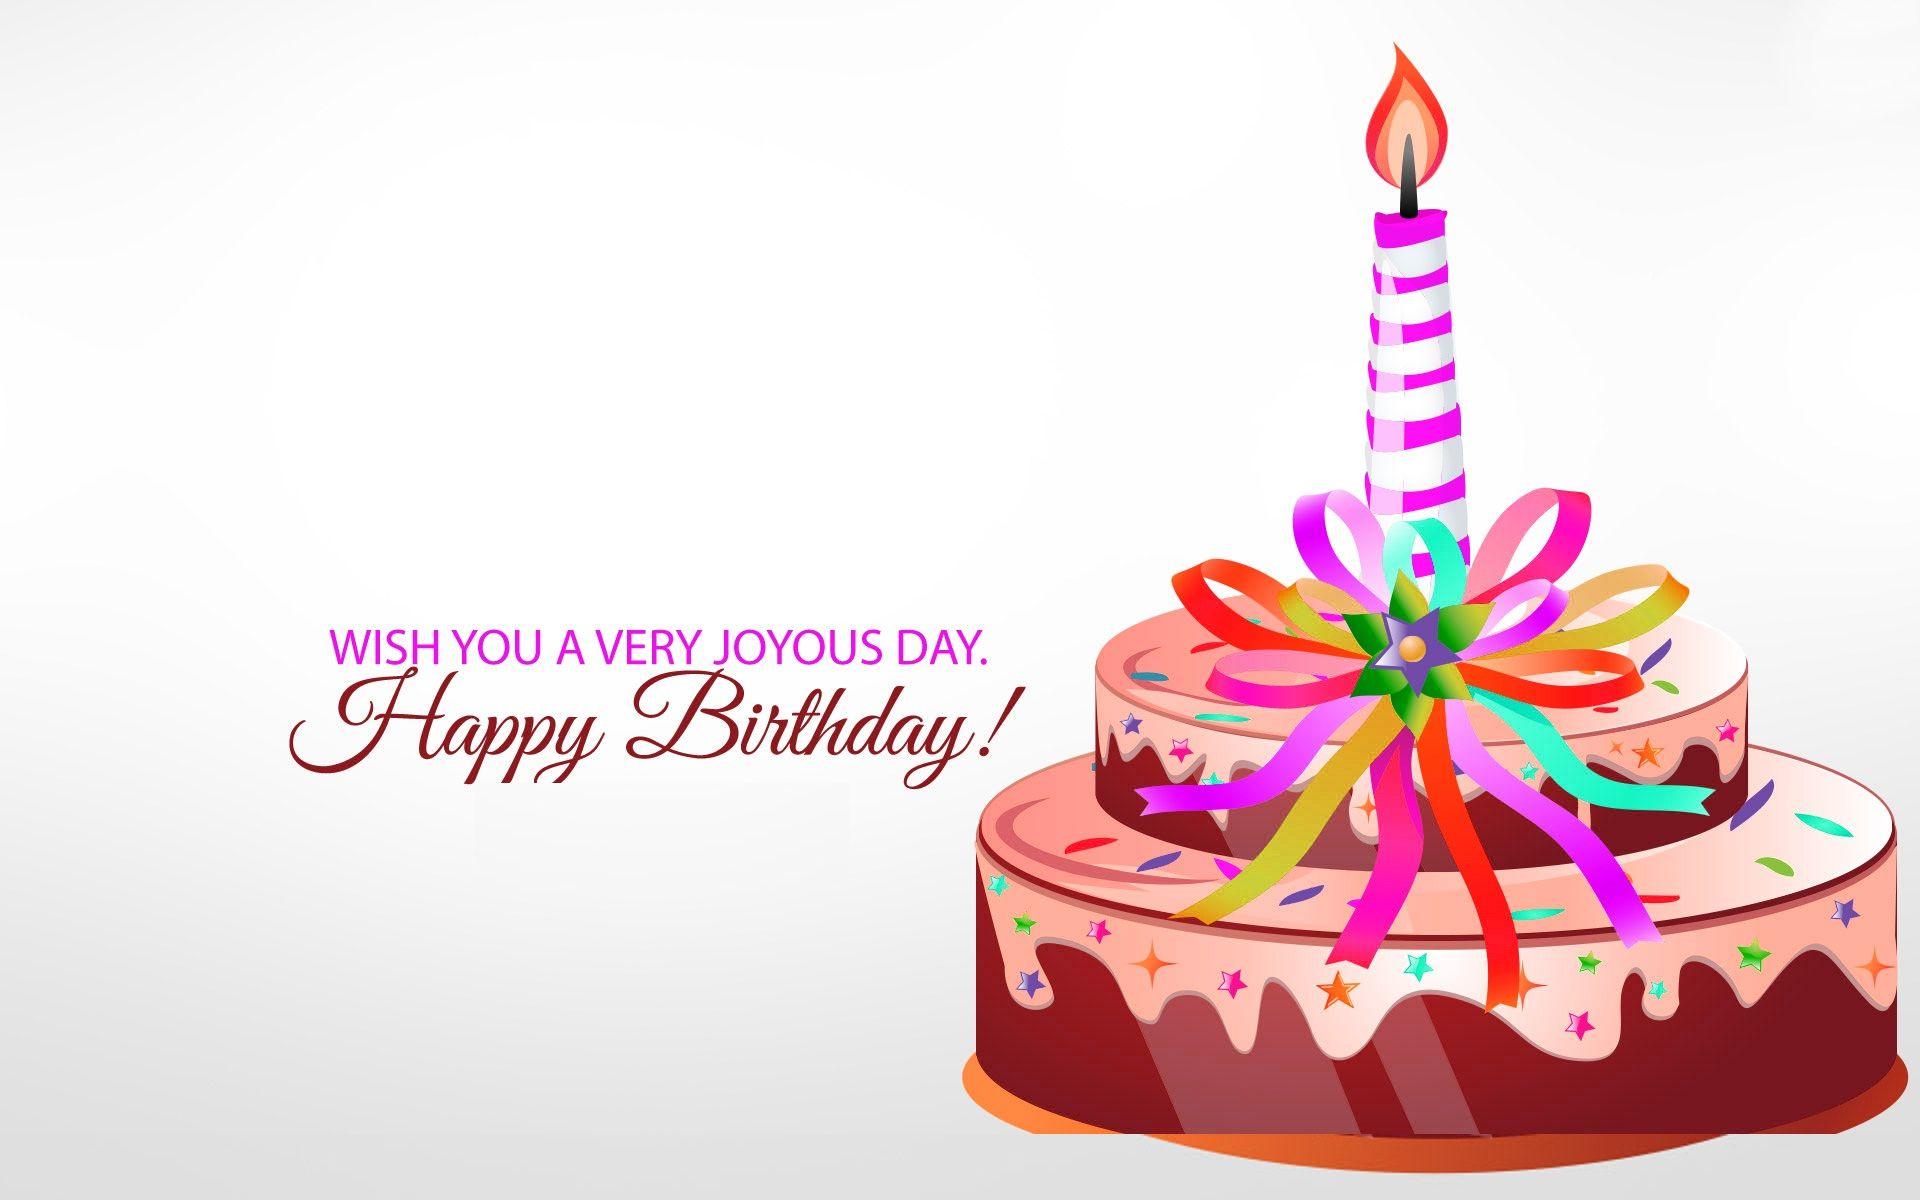 Happy Birthday Wishes Wallpaper, Image, Picture, Photos, HD Wallpaper Wallpaper Of. Happy birthday wishes image, Happy birthday hd, Birthday wishes and image